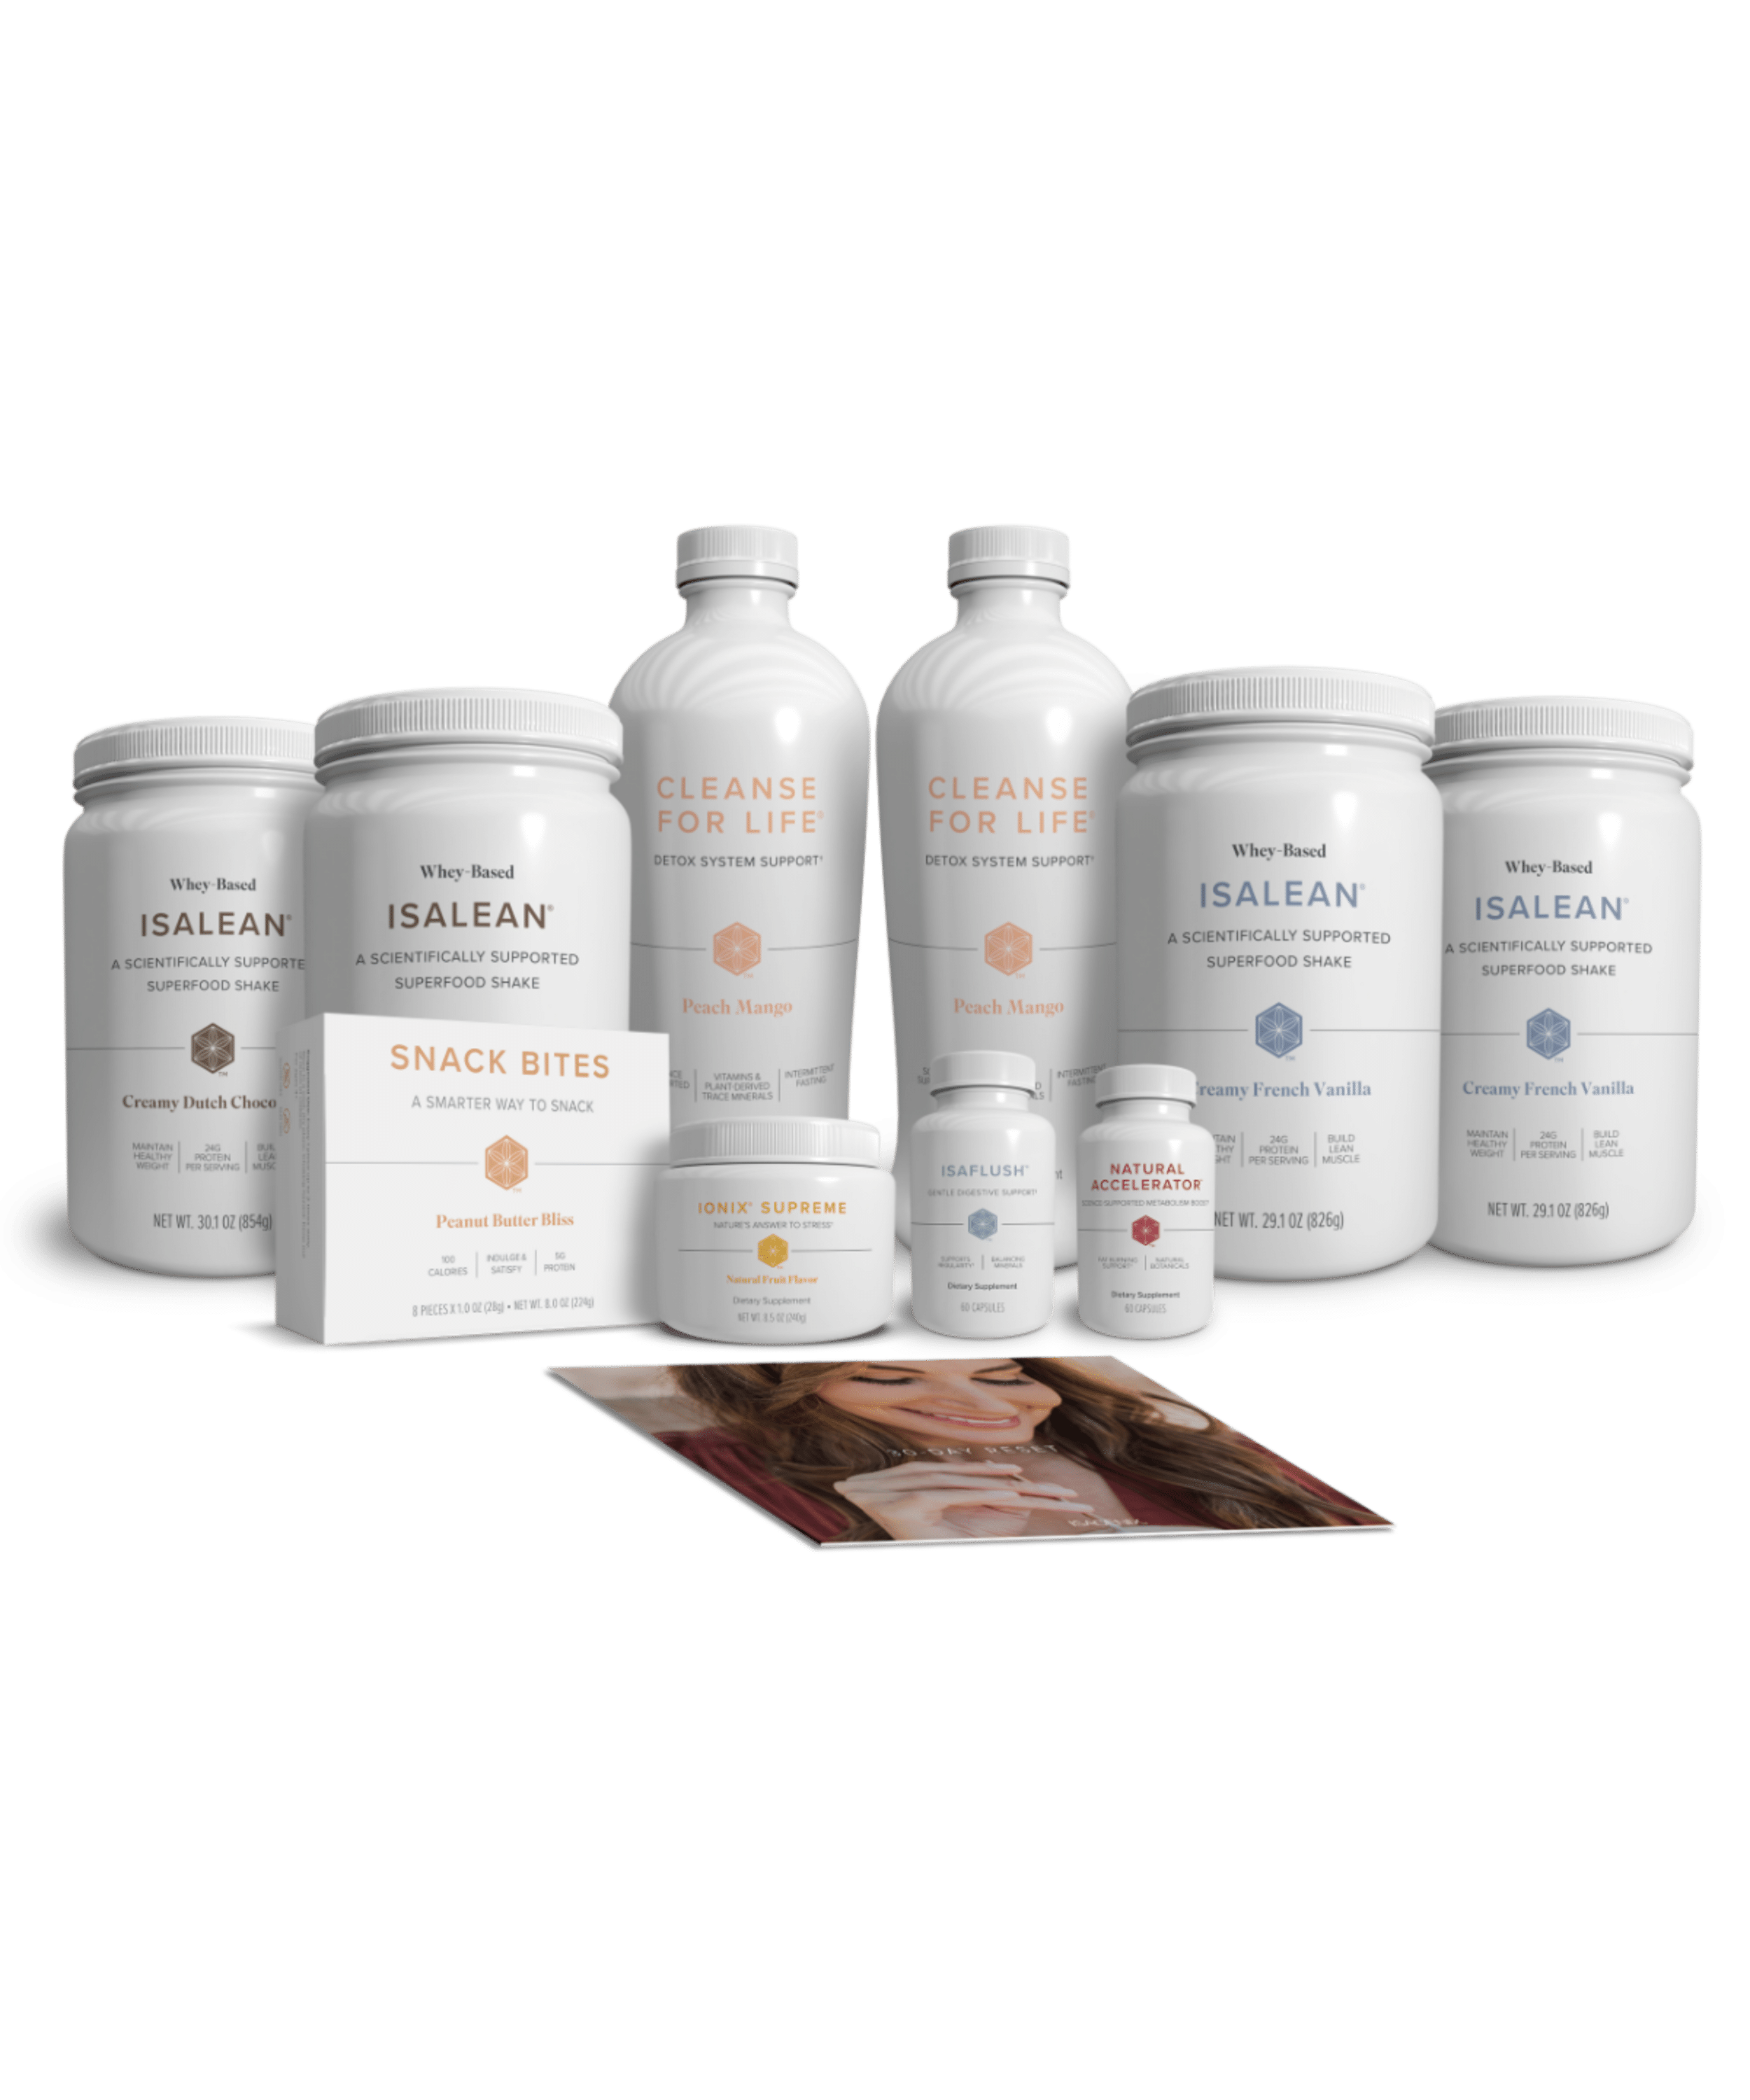 Isagenix 30-Day Reset Pack weight loss treatment